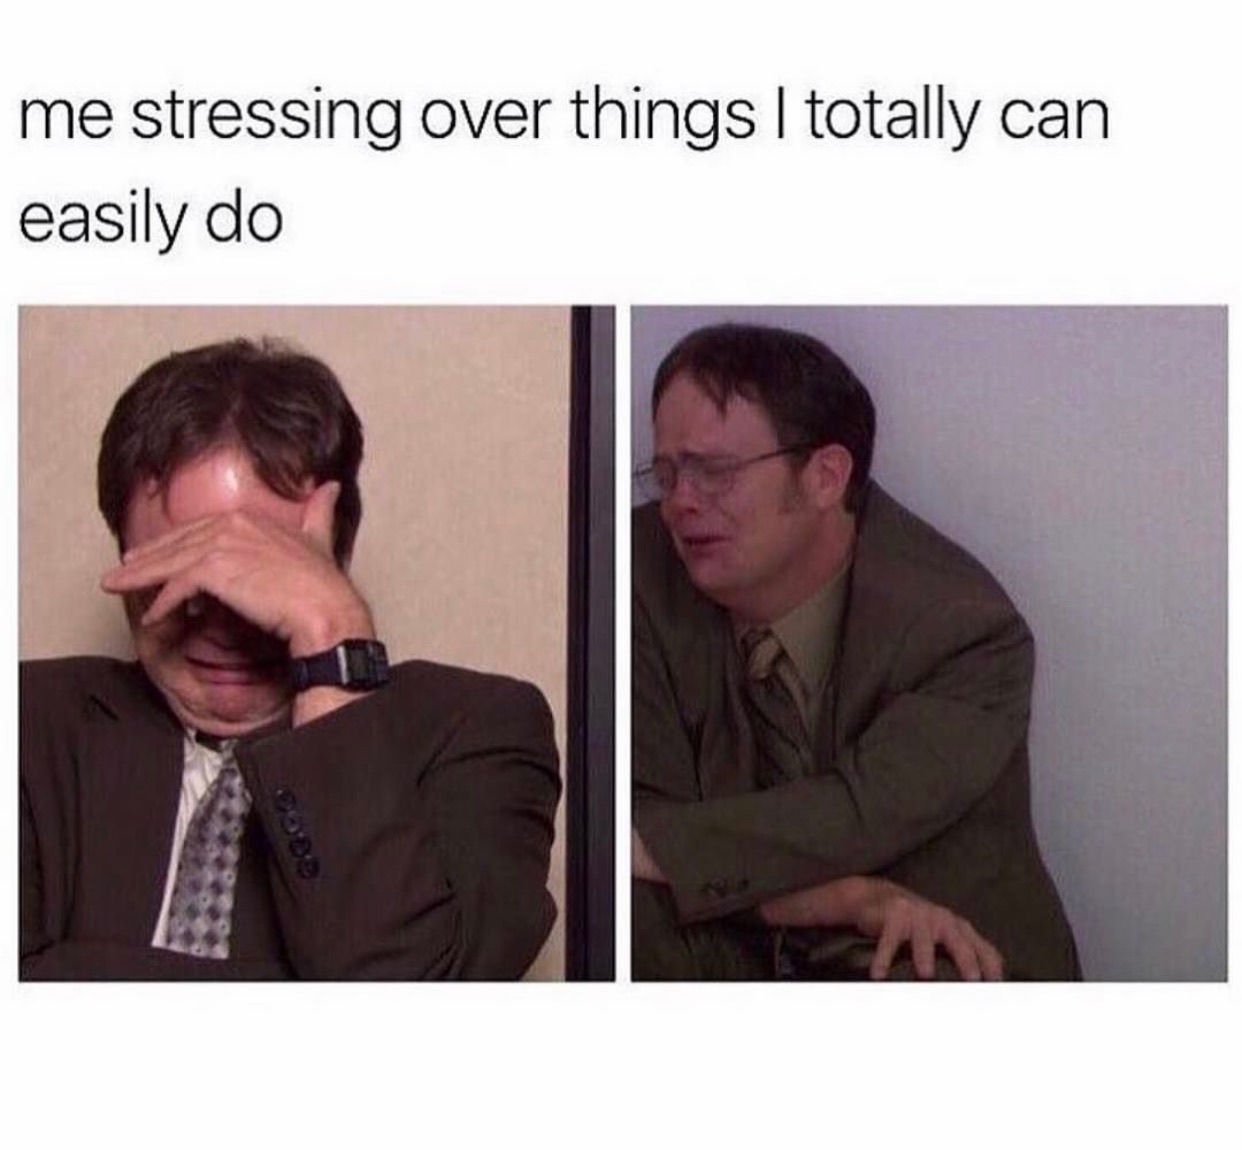 memes - funny relatable memes - me stressing over things I totally can easily do